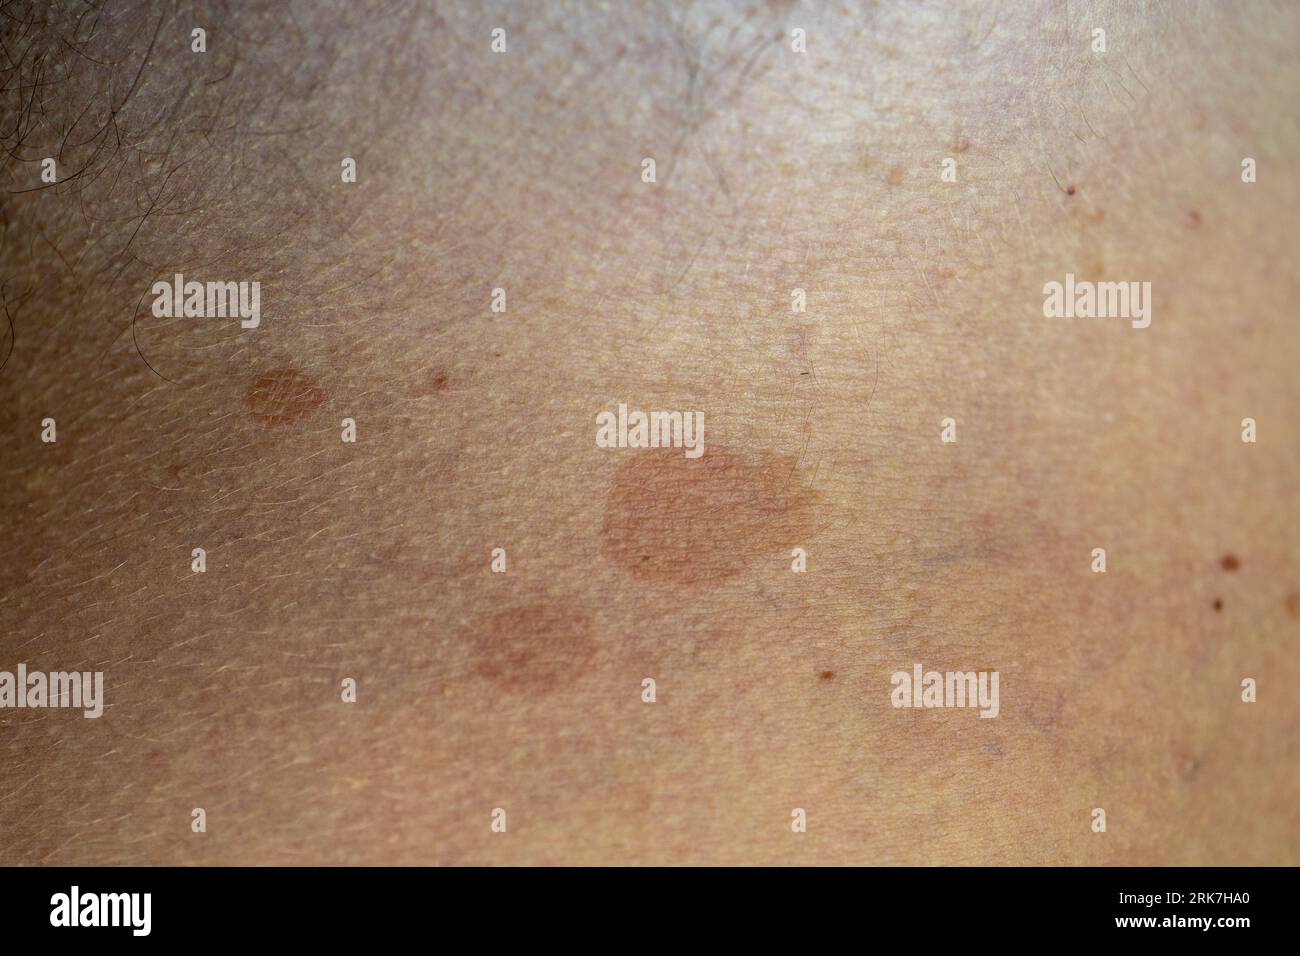 A man suffering from the skin condition Tinea Versicolor with discolored  patches on the skin Stock Photo - Alamy